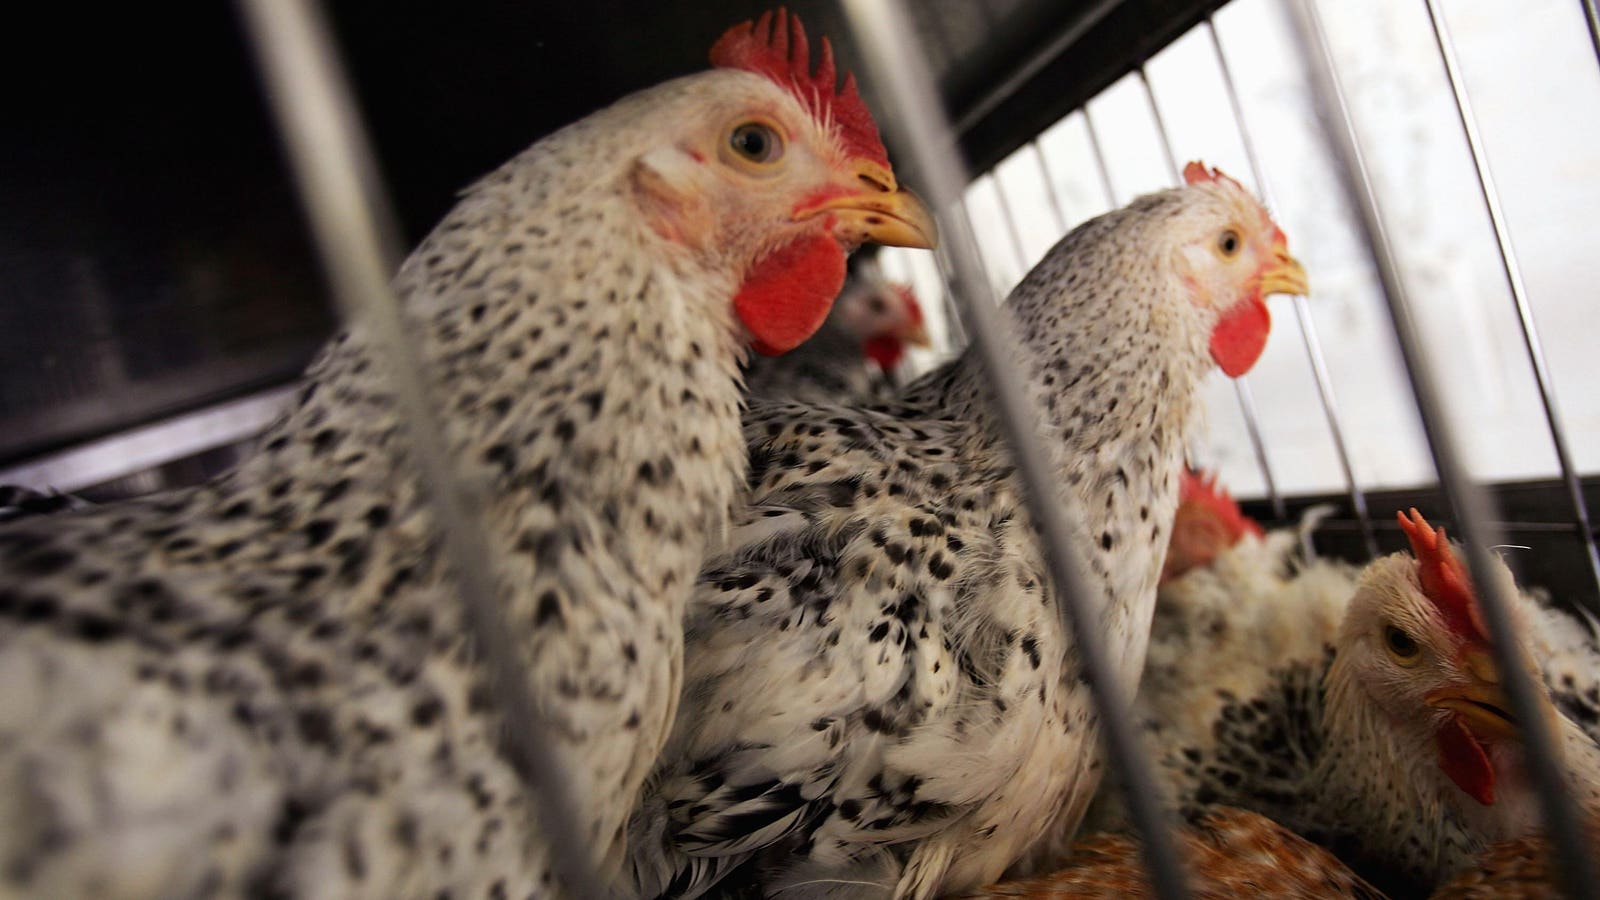 Could chicken feces be the cause of cow flu outbreaks?